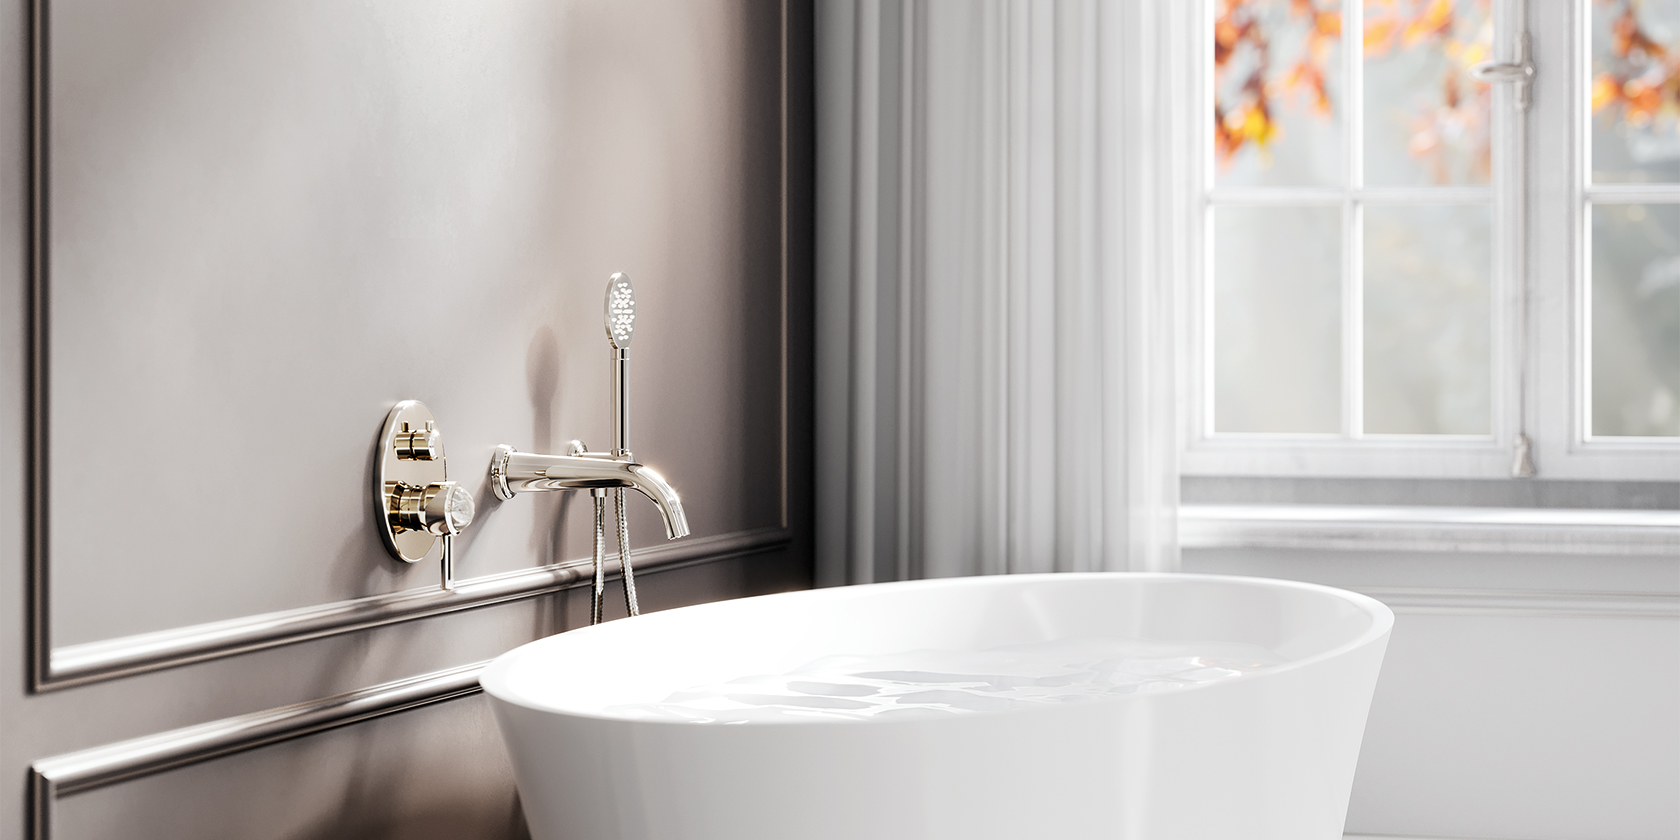 Classical elegance meets “Belledor” in mother-of-pearl magic – the new bathroom inspiration by Jörger Design